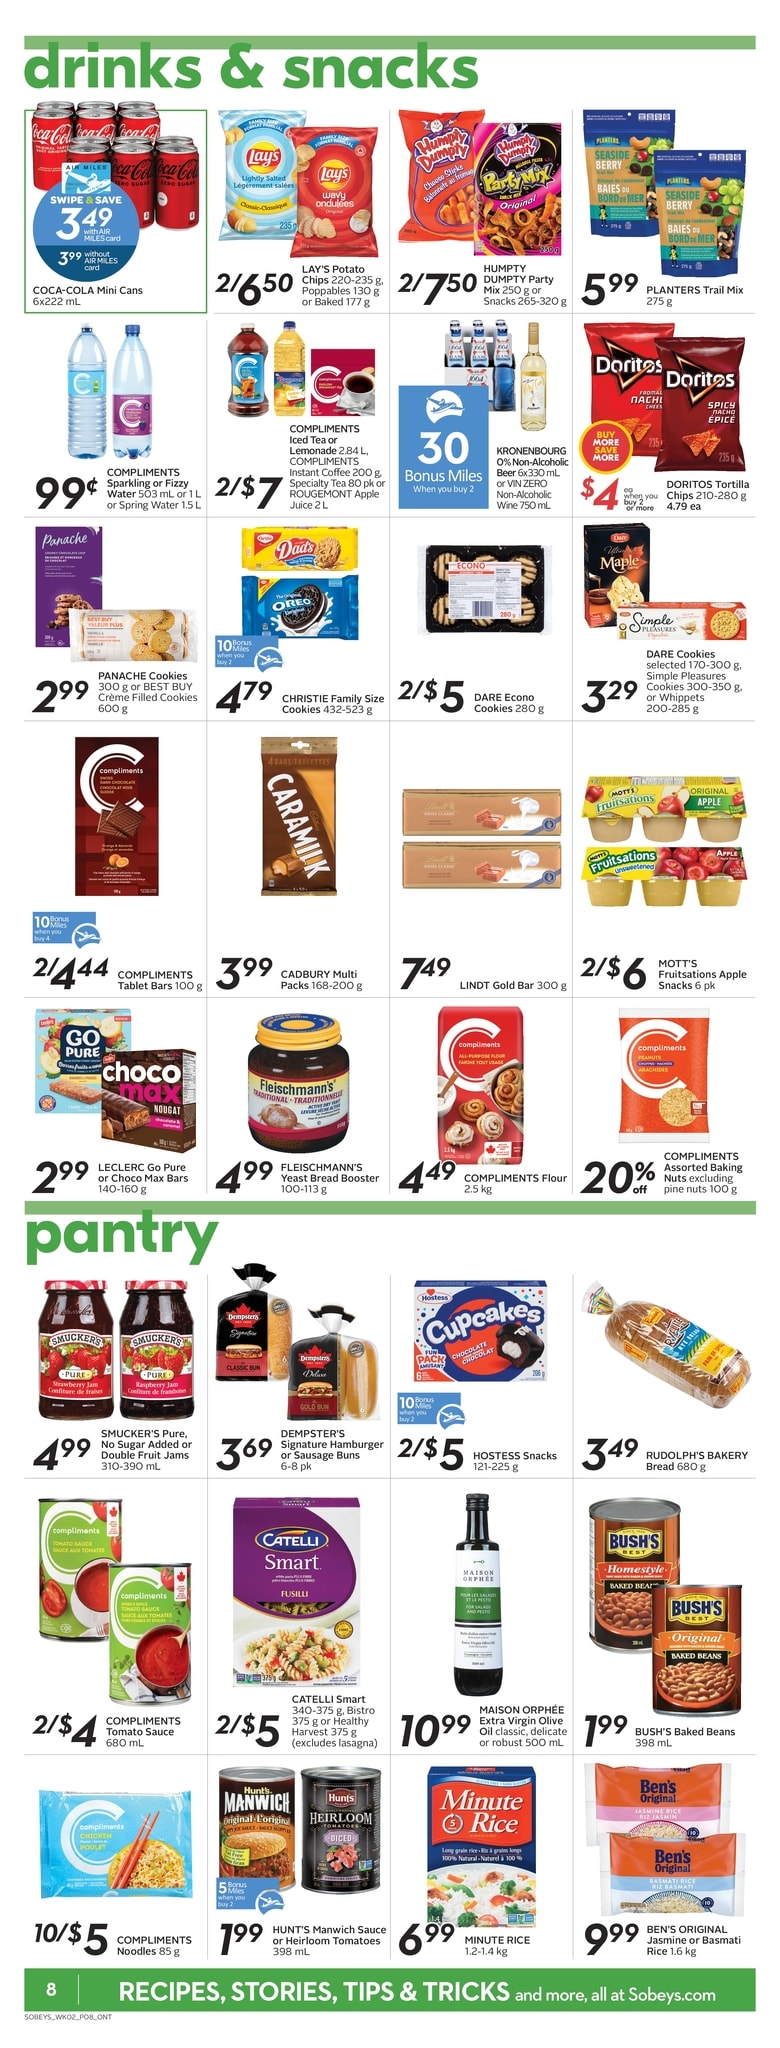 Sobeys - Weekly Flyer Specials - Page 10